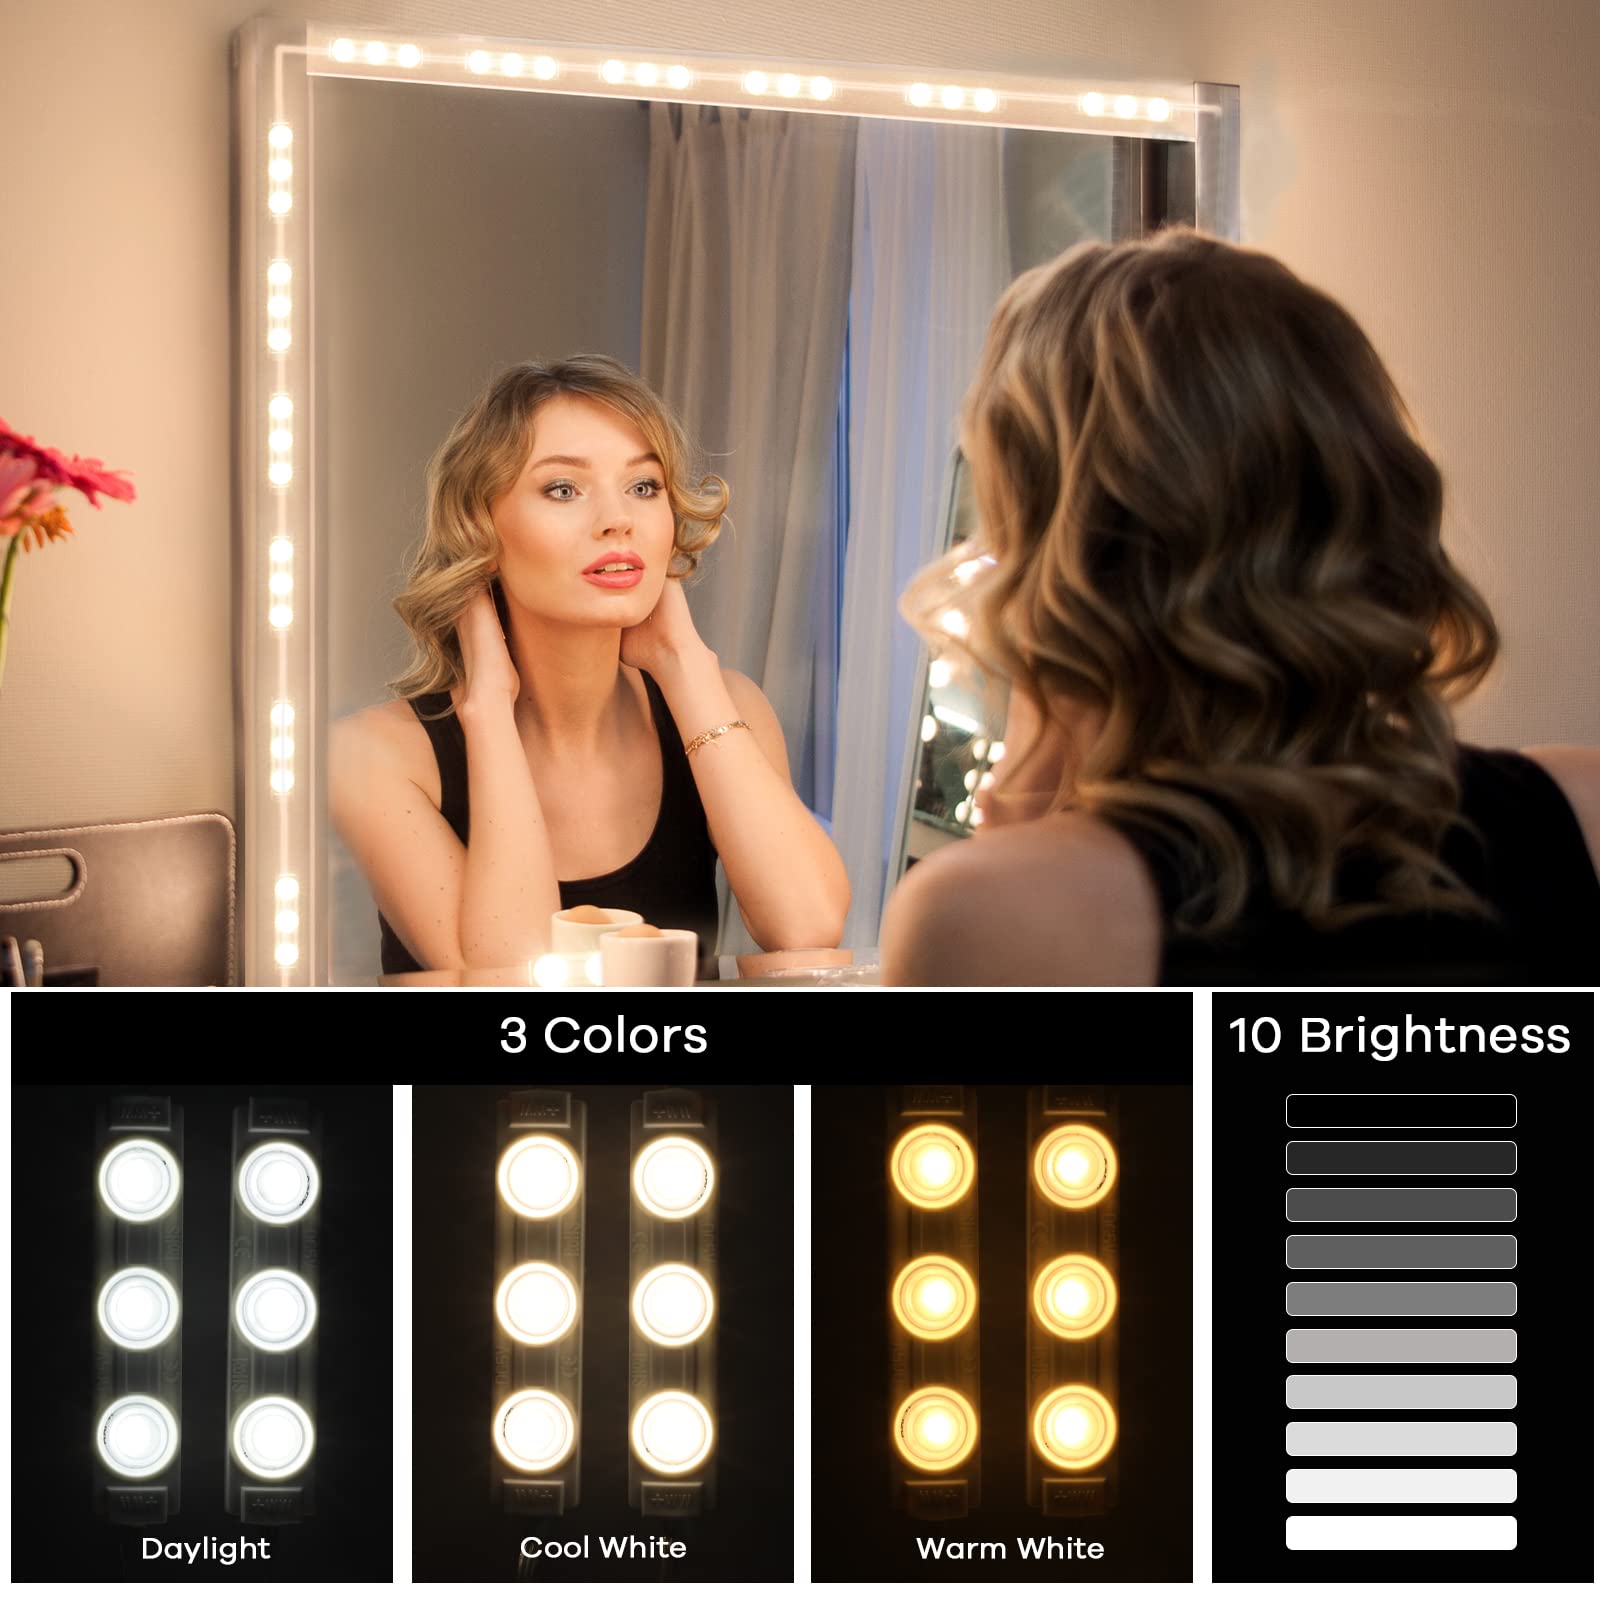 Consciot LED Vanity Lights for Mirror, Hollywood Style Mirror Strip, Adjustable Color & Brightness, USB Cable, Dimmable Makeup Stick on Table Dressing Room Mirror,White